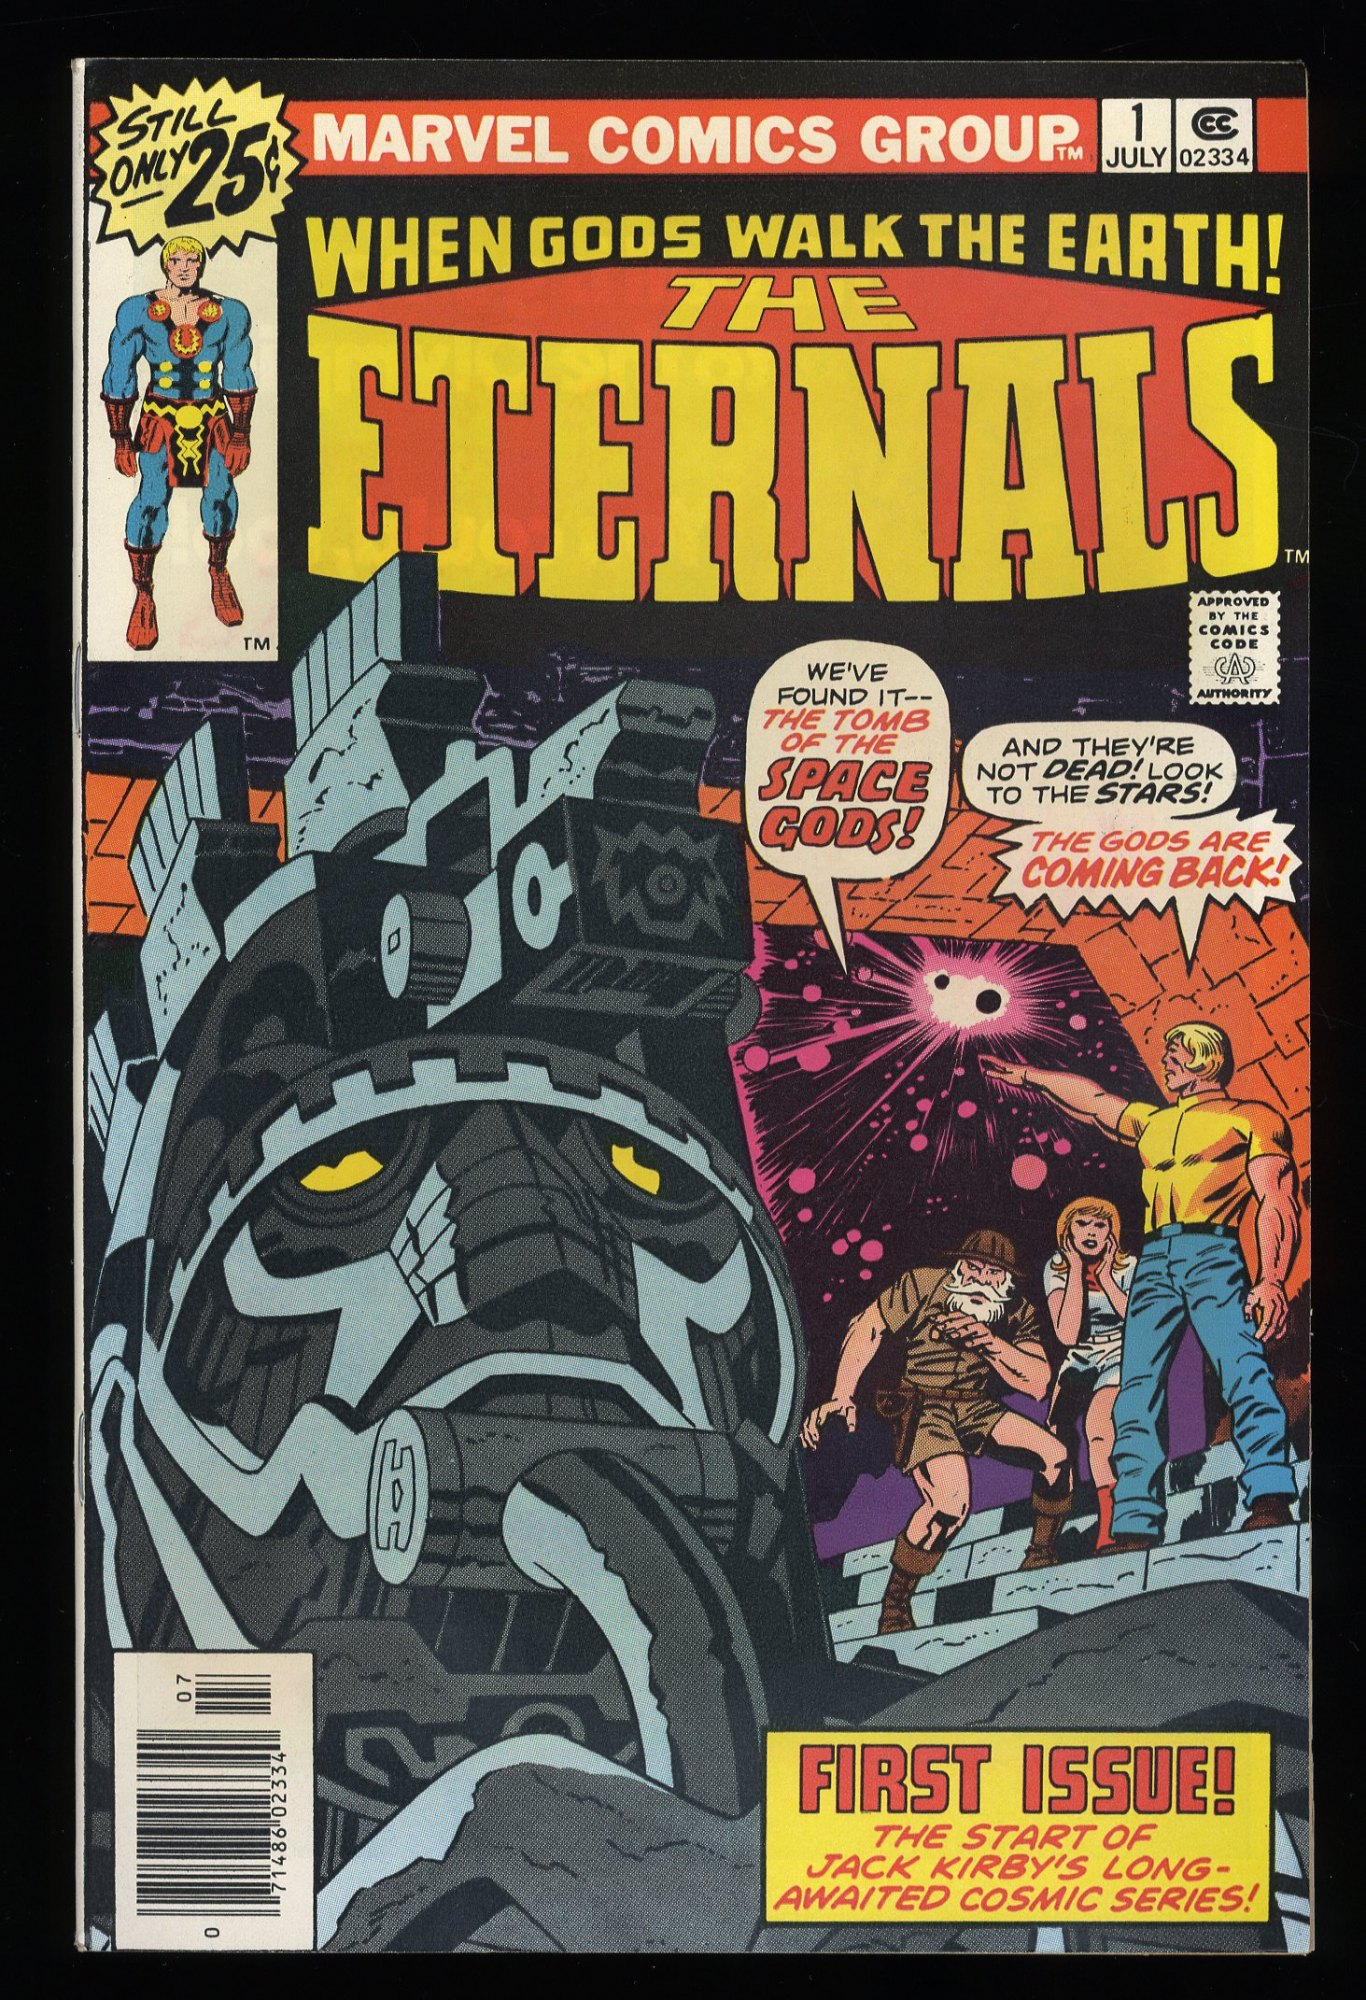 Eternals #1 NM- 9.2 Origin and 1st Appearance! Jack Kirby Art!